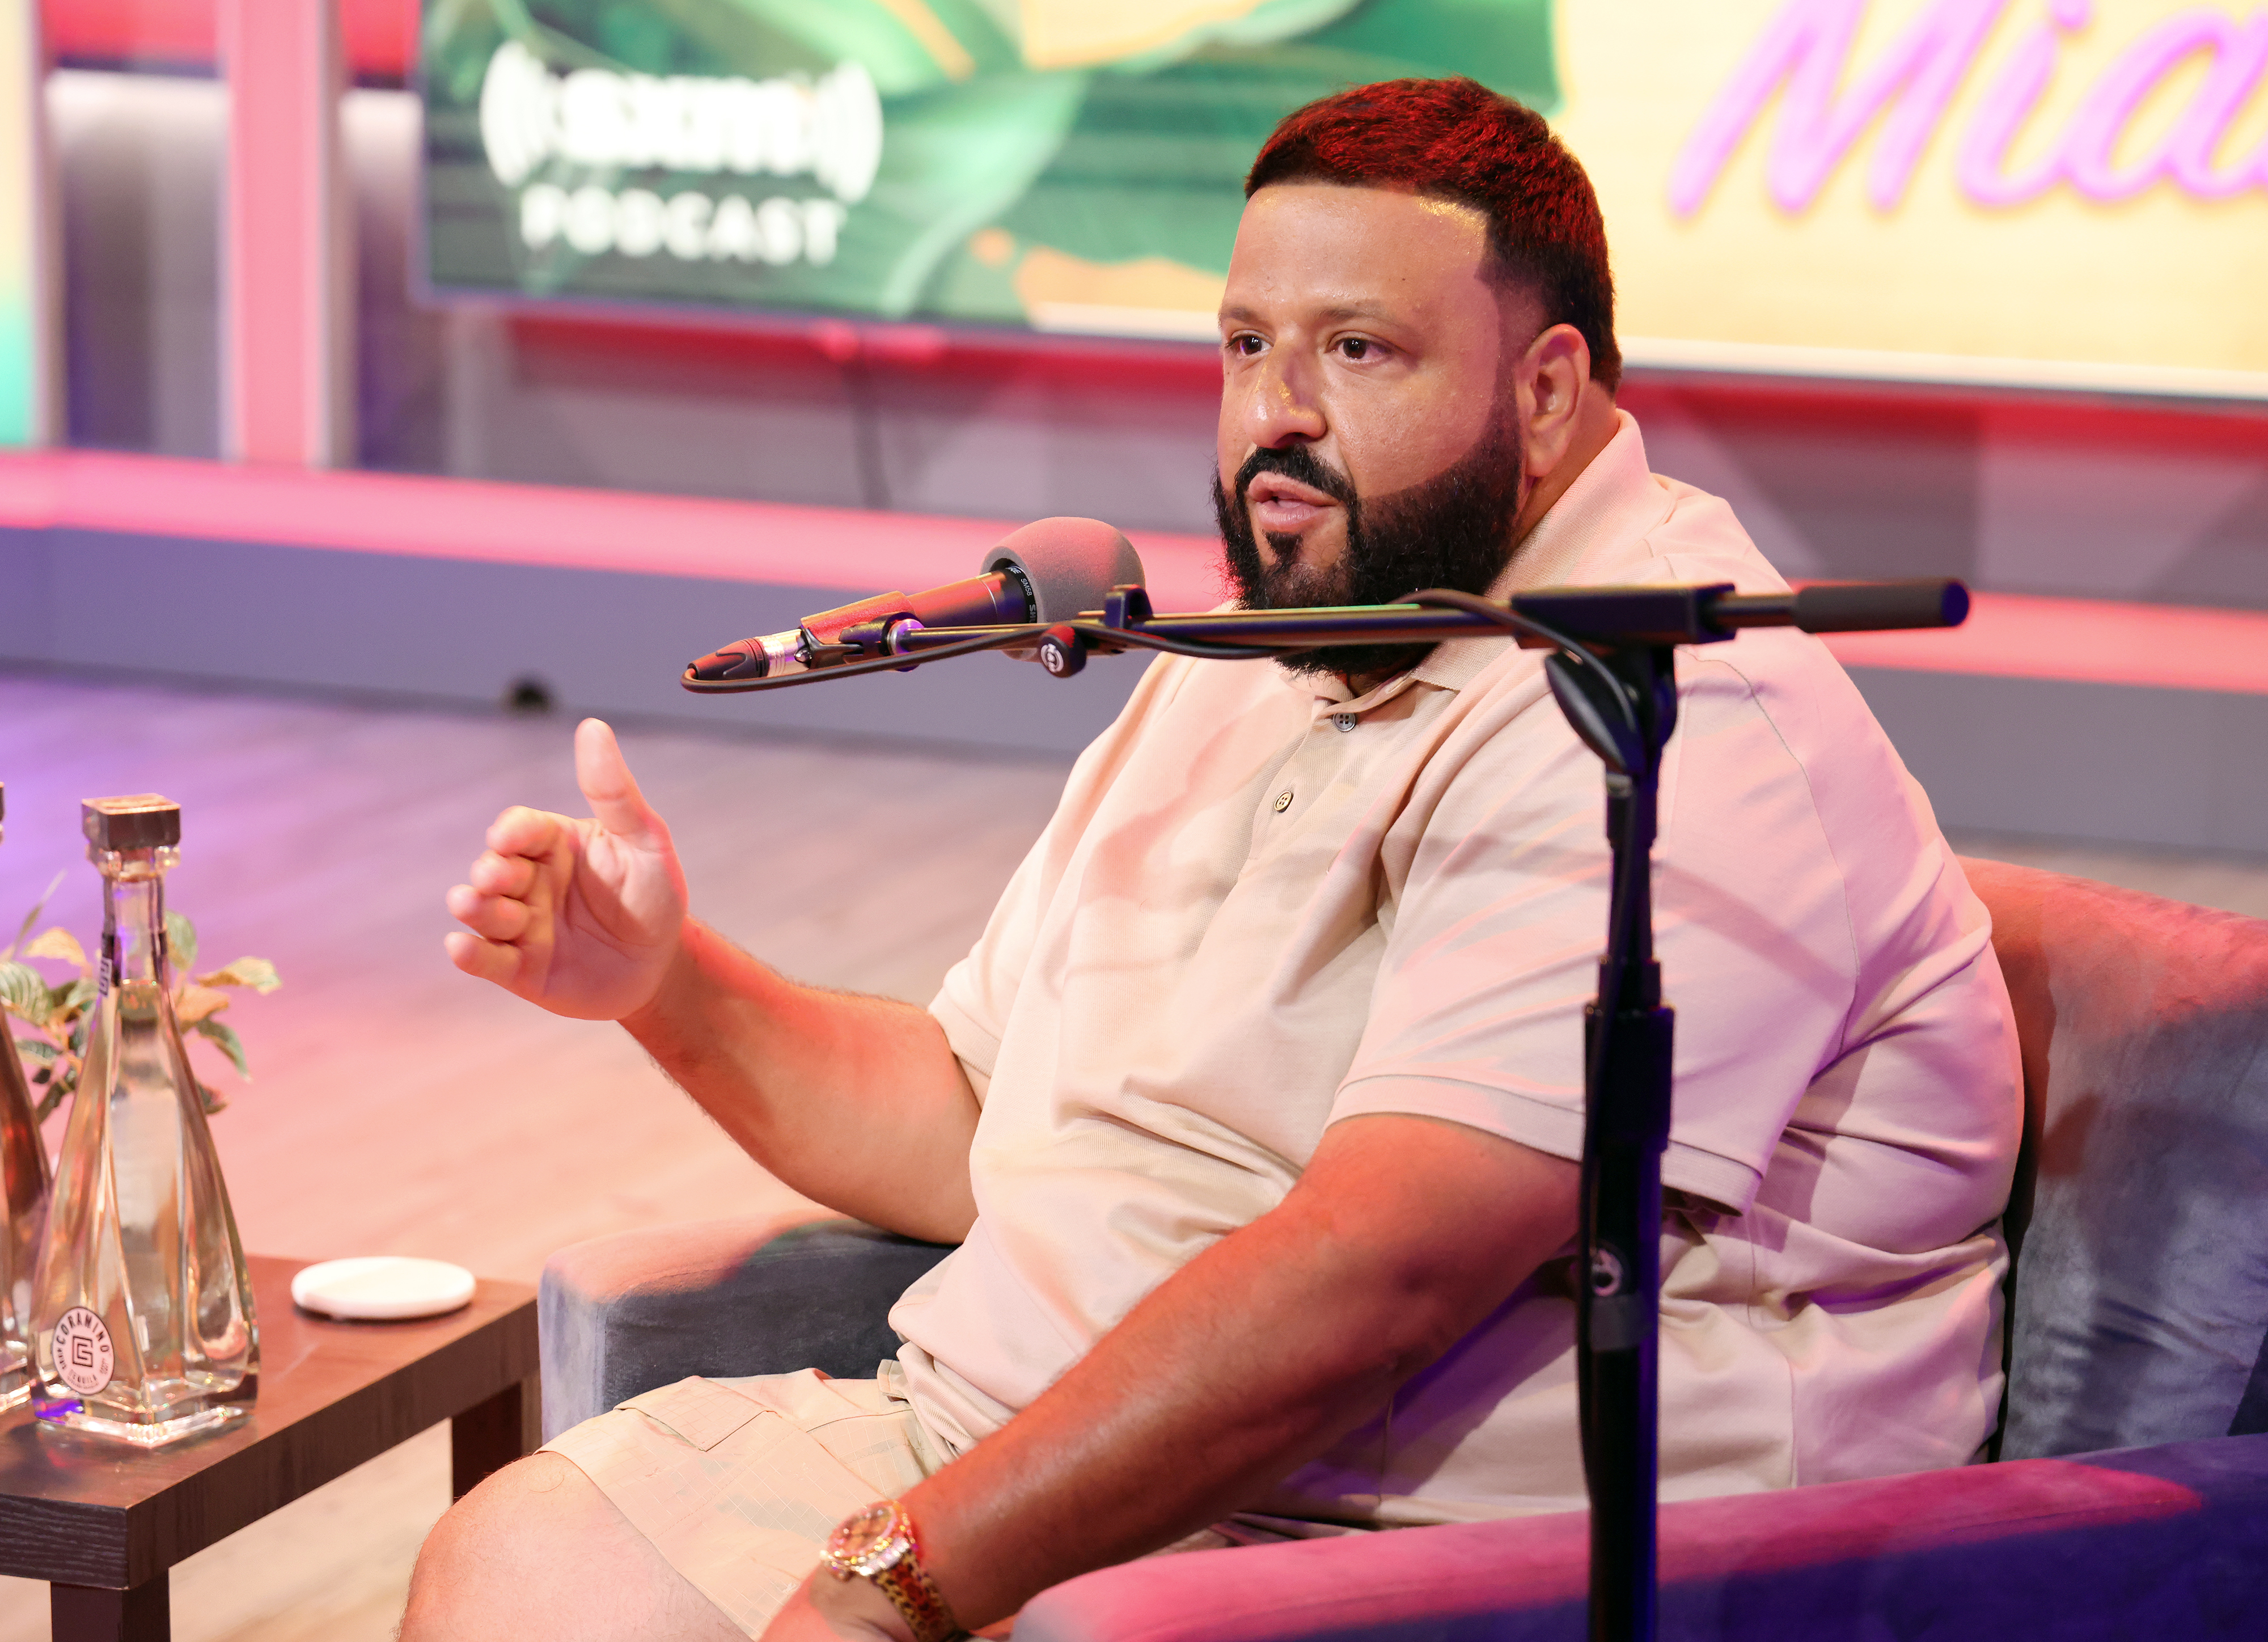 DJ Khaled wipes out in surfing accident, shares 'recovery' efforts with  massages and golfing